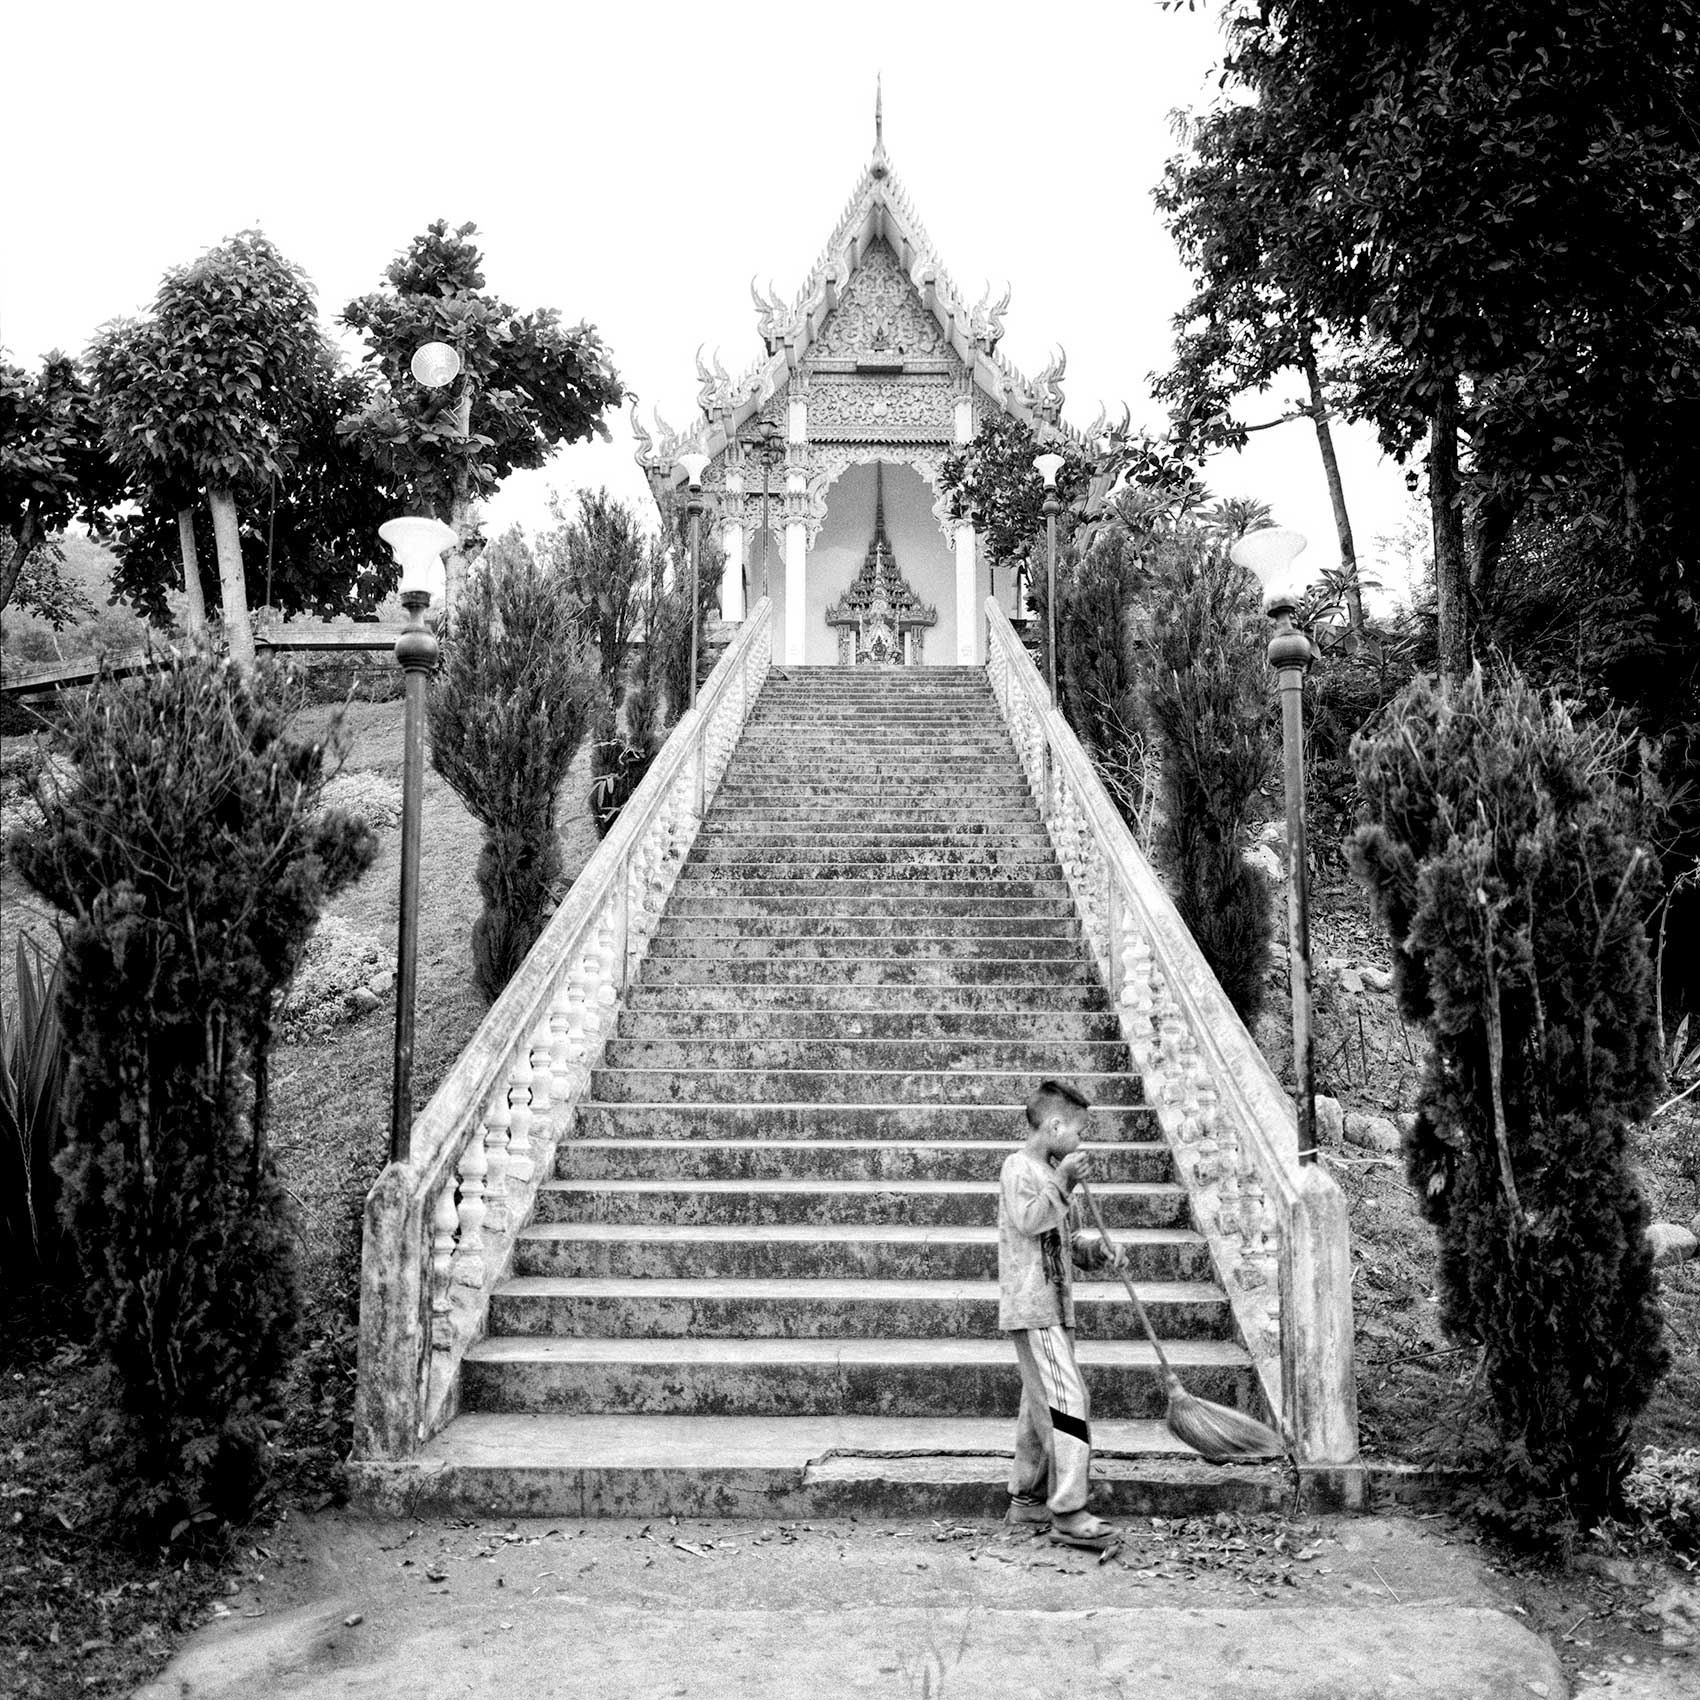 a-young-boy-sweeps-the-steps-of-a-buddhist-temple-in-chang-rai-thailand